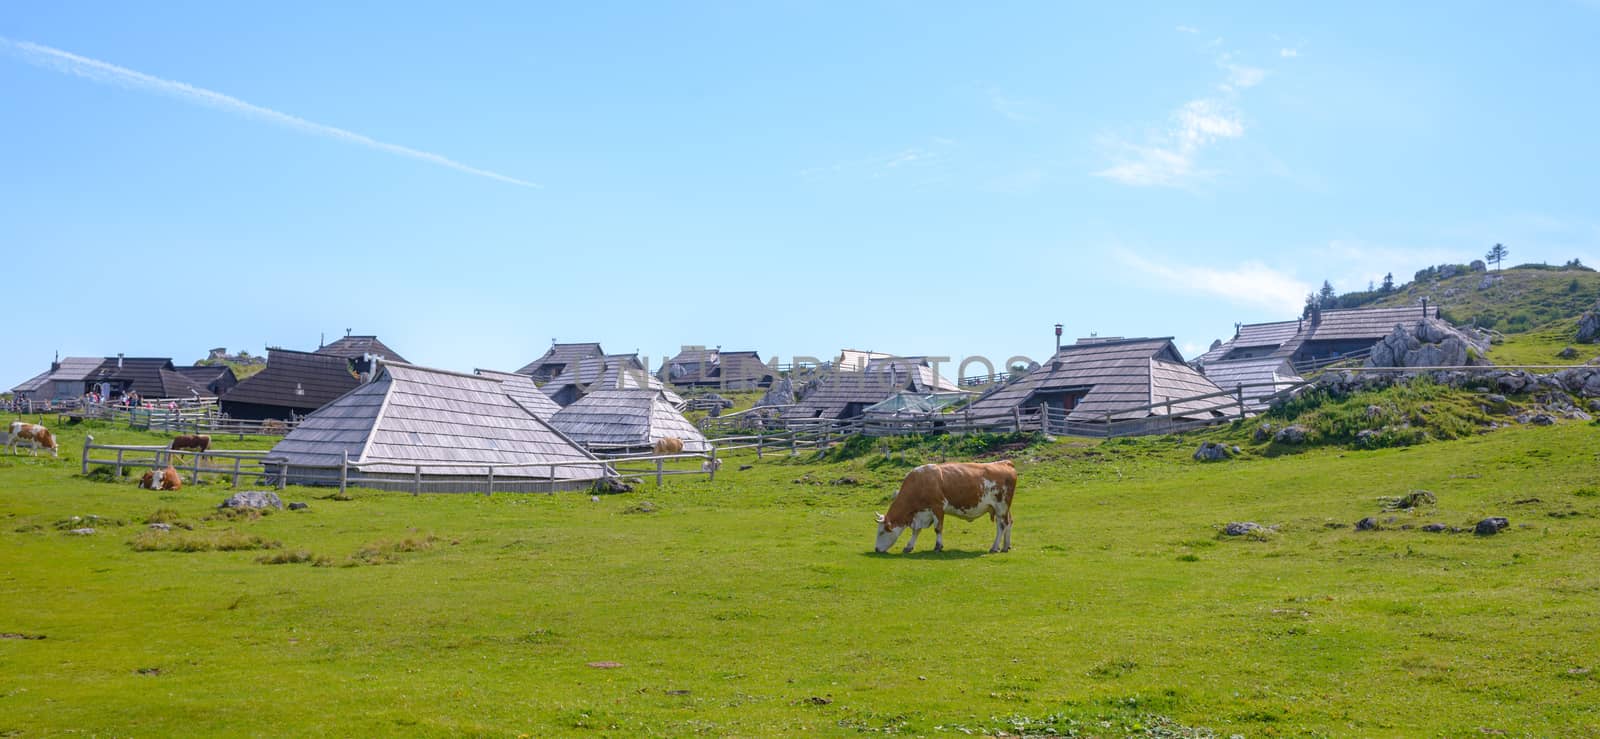 Velika planina plateau, Slovenia, Mountain village in Alps, wooden houses in traditional style, popular hiking destination by asafaric